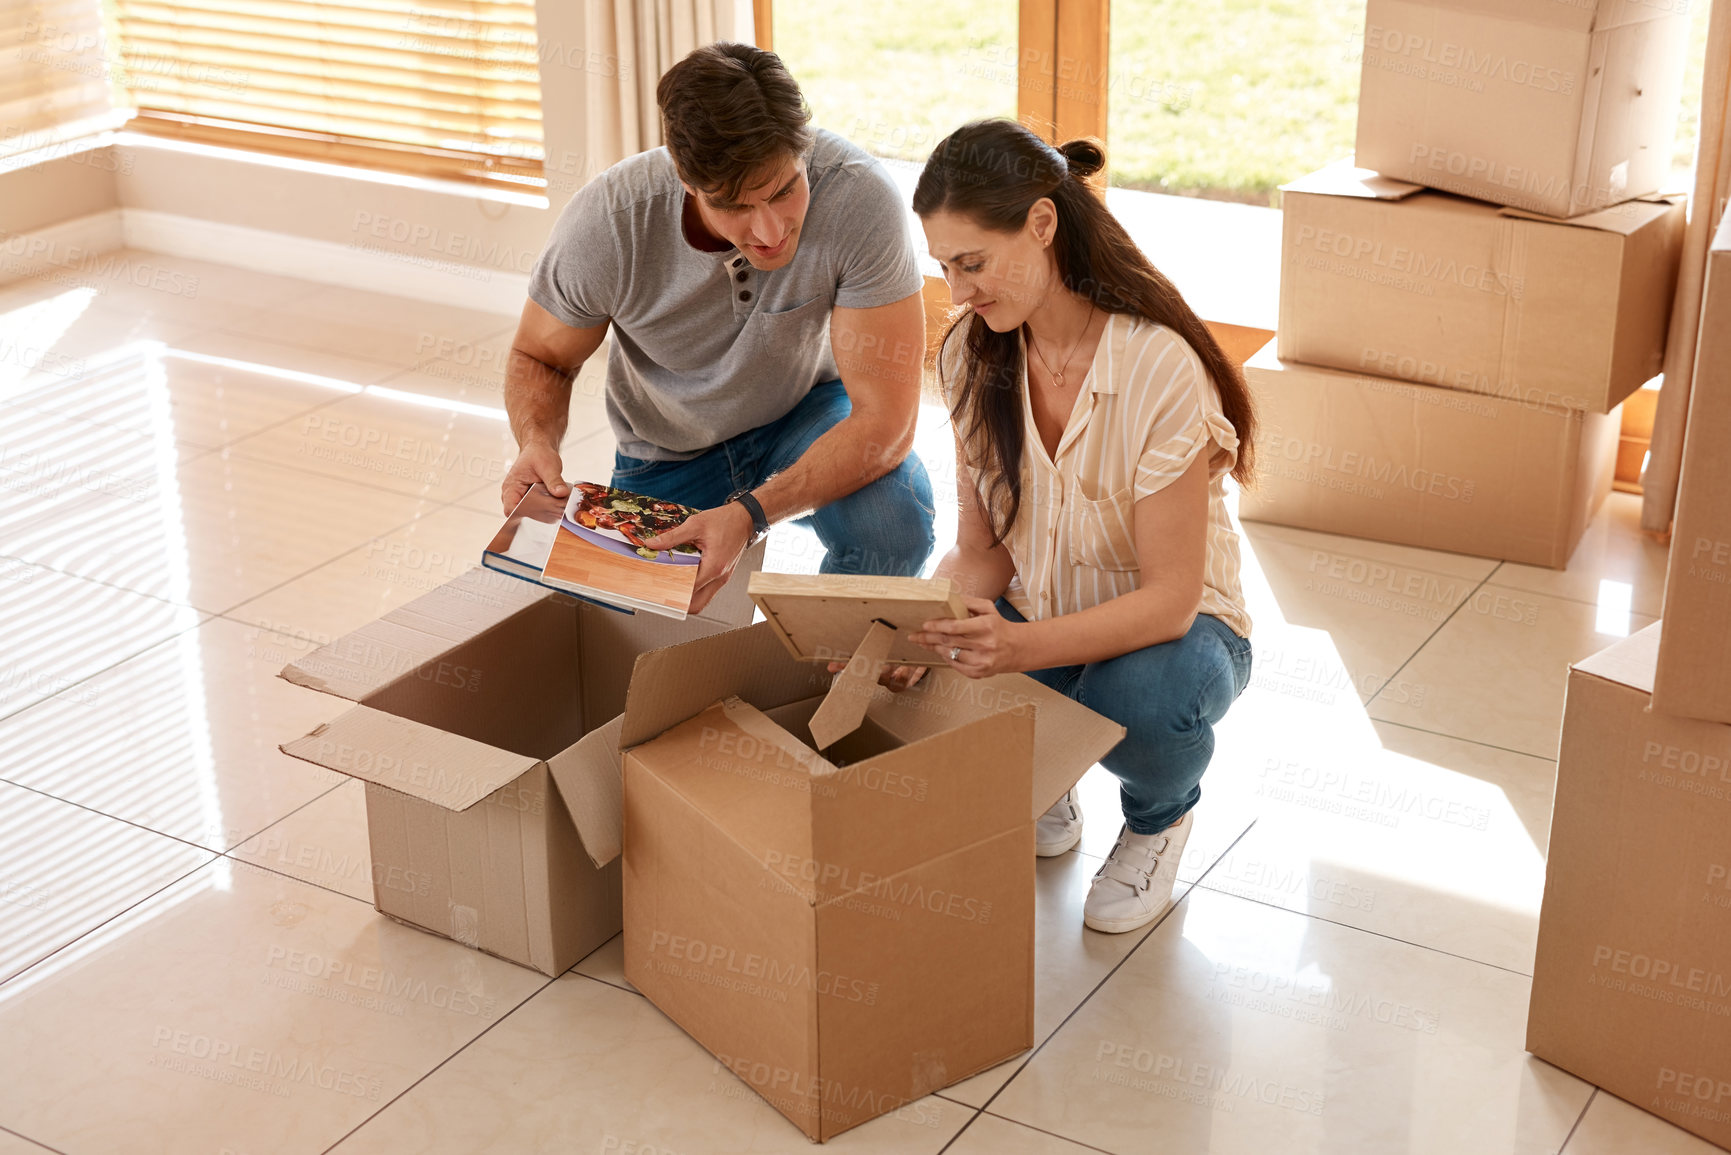 Buy stock photo Shot of a couple unpacking boxes in their new home